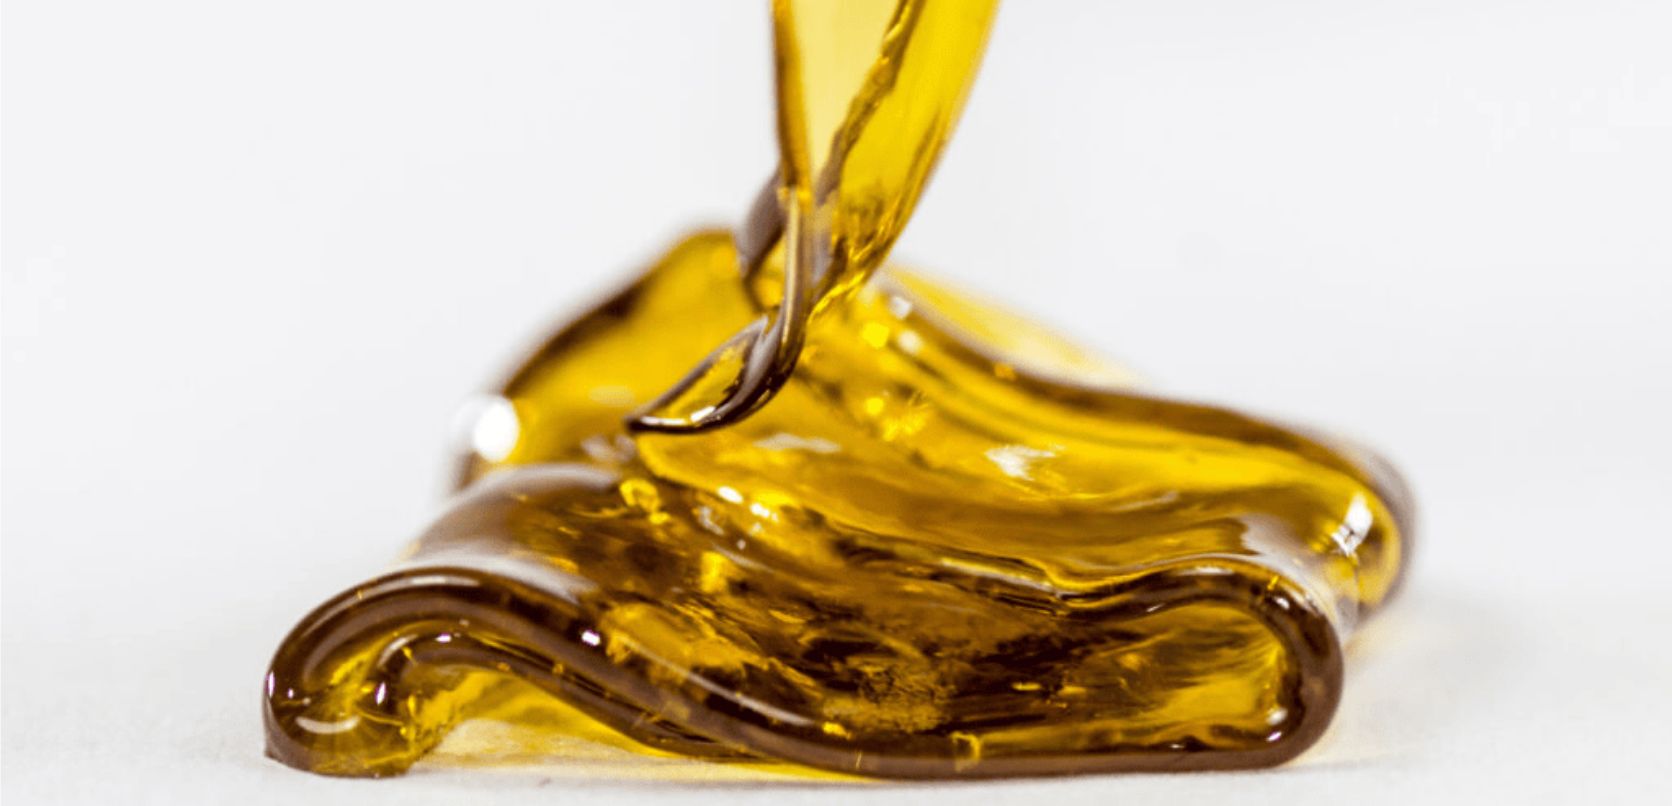 Now that you have the answer to "What are distillates?", it's time to look at what makes them unique. The potency. 